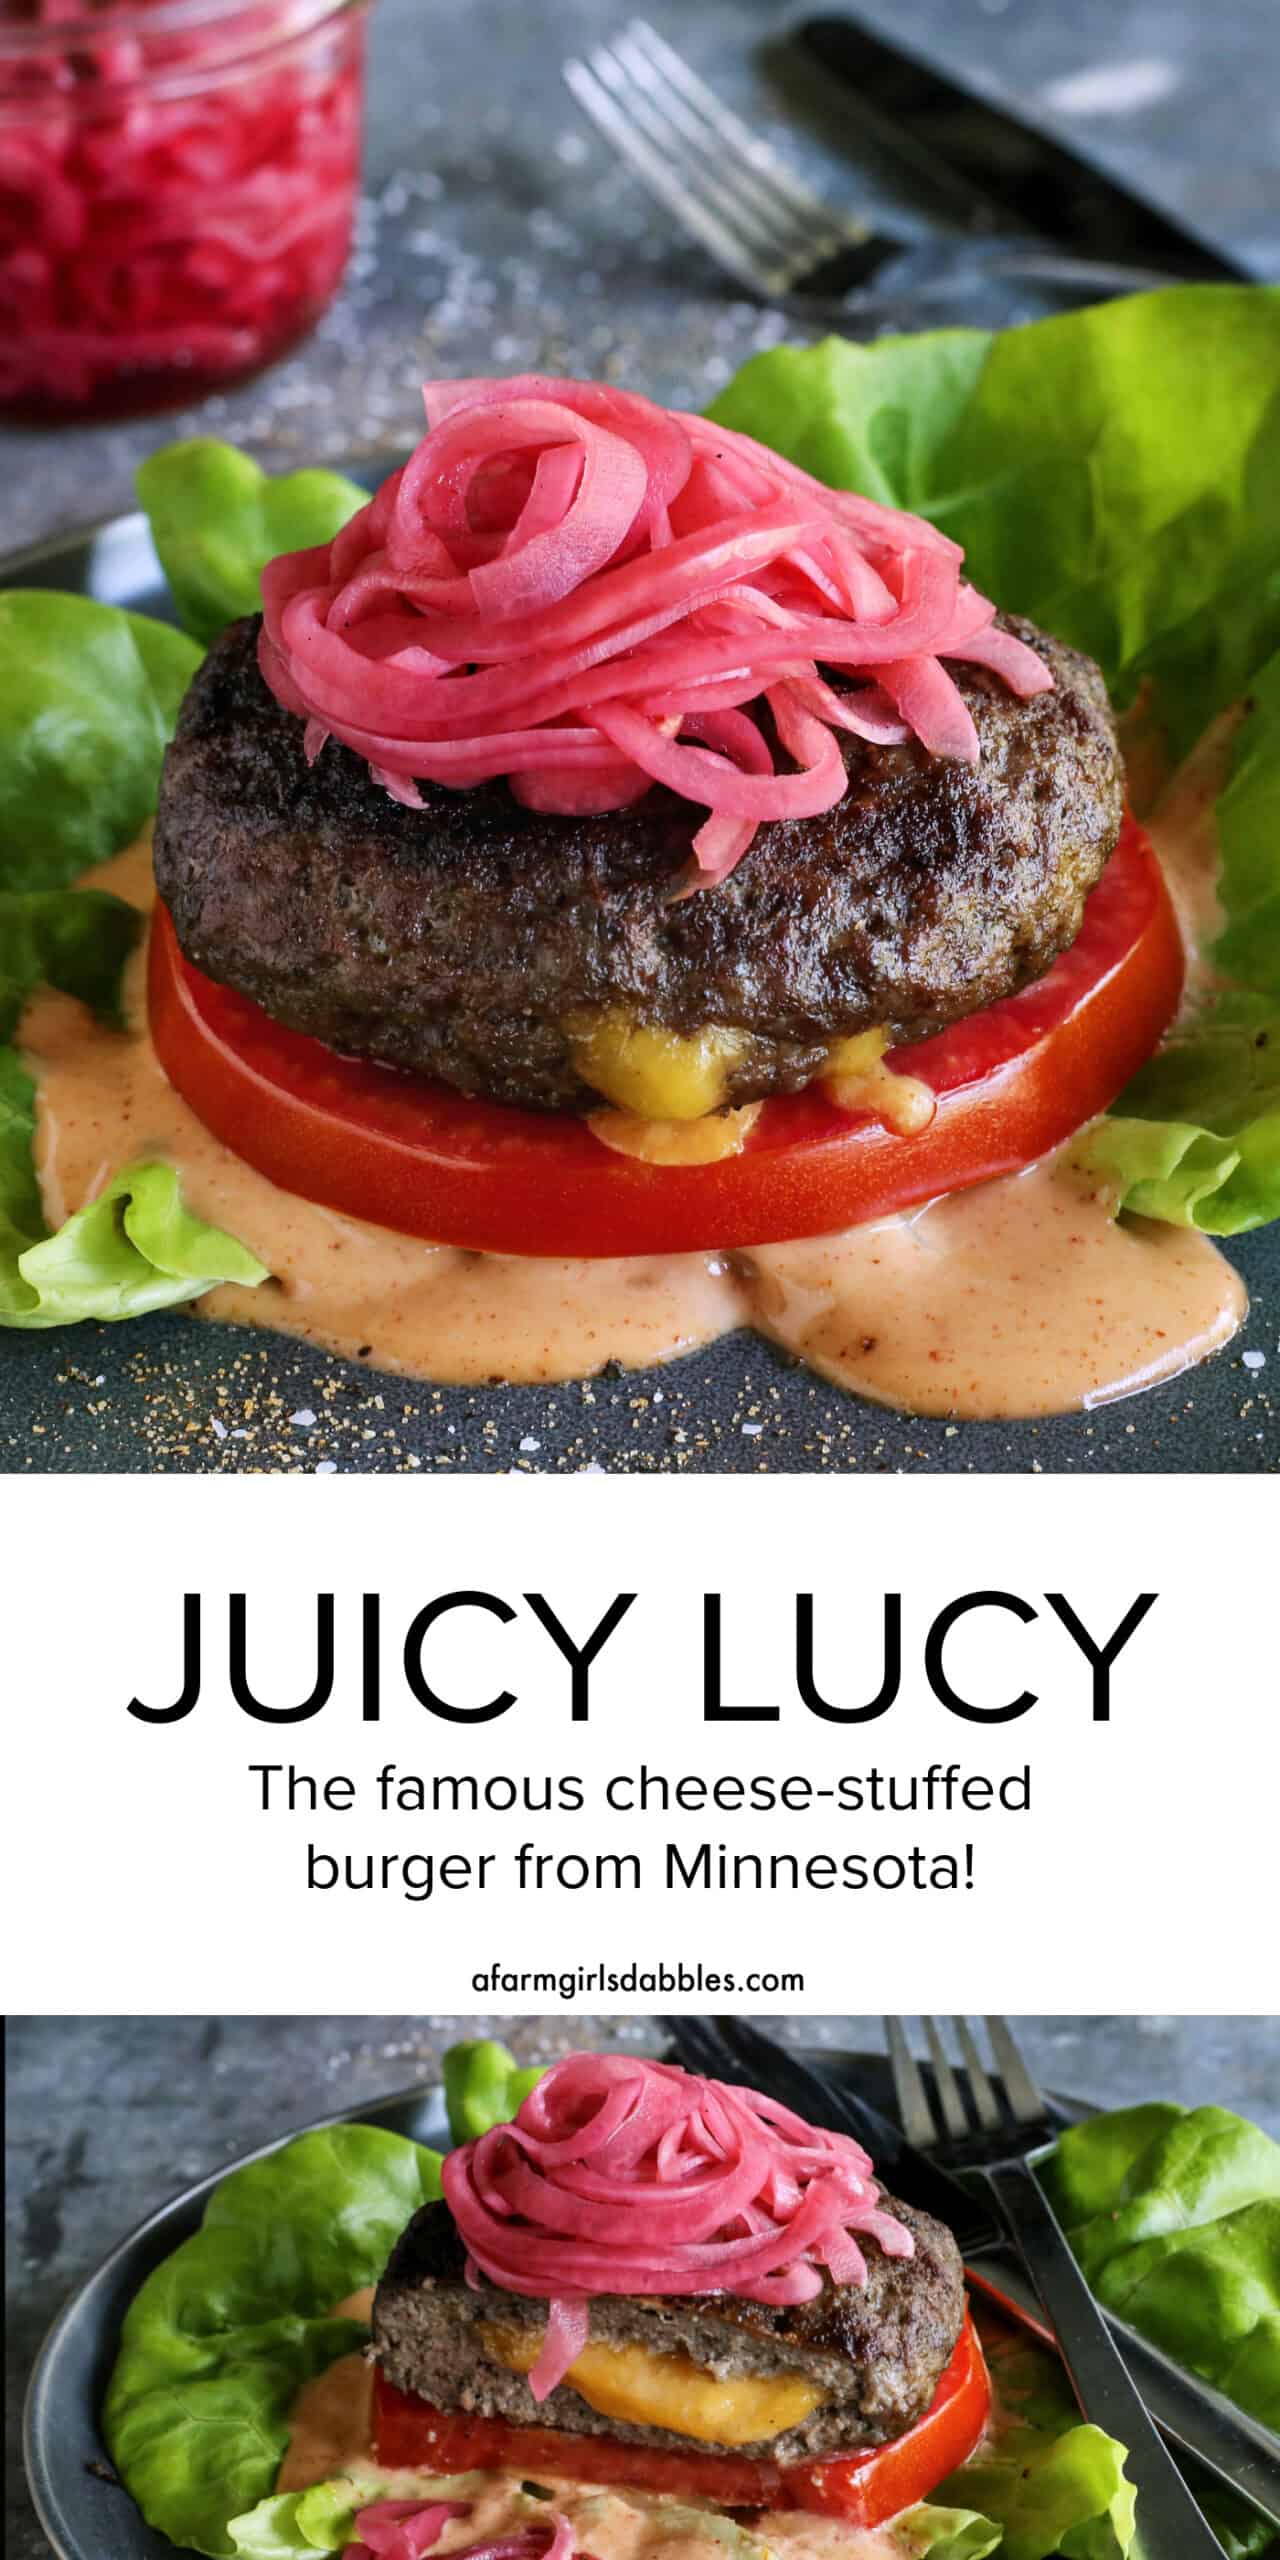 Pinterest image for Juicy Lucy cheeseburger